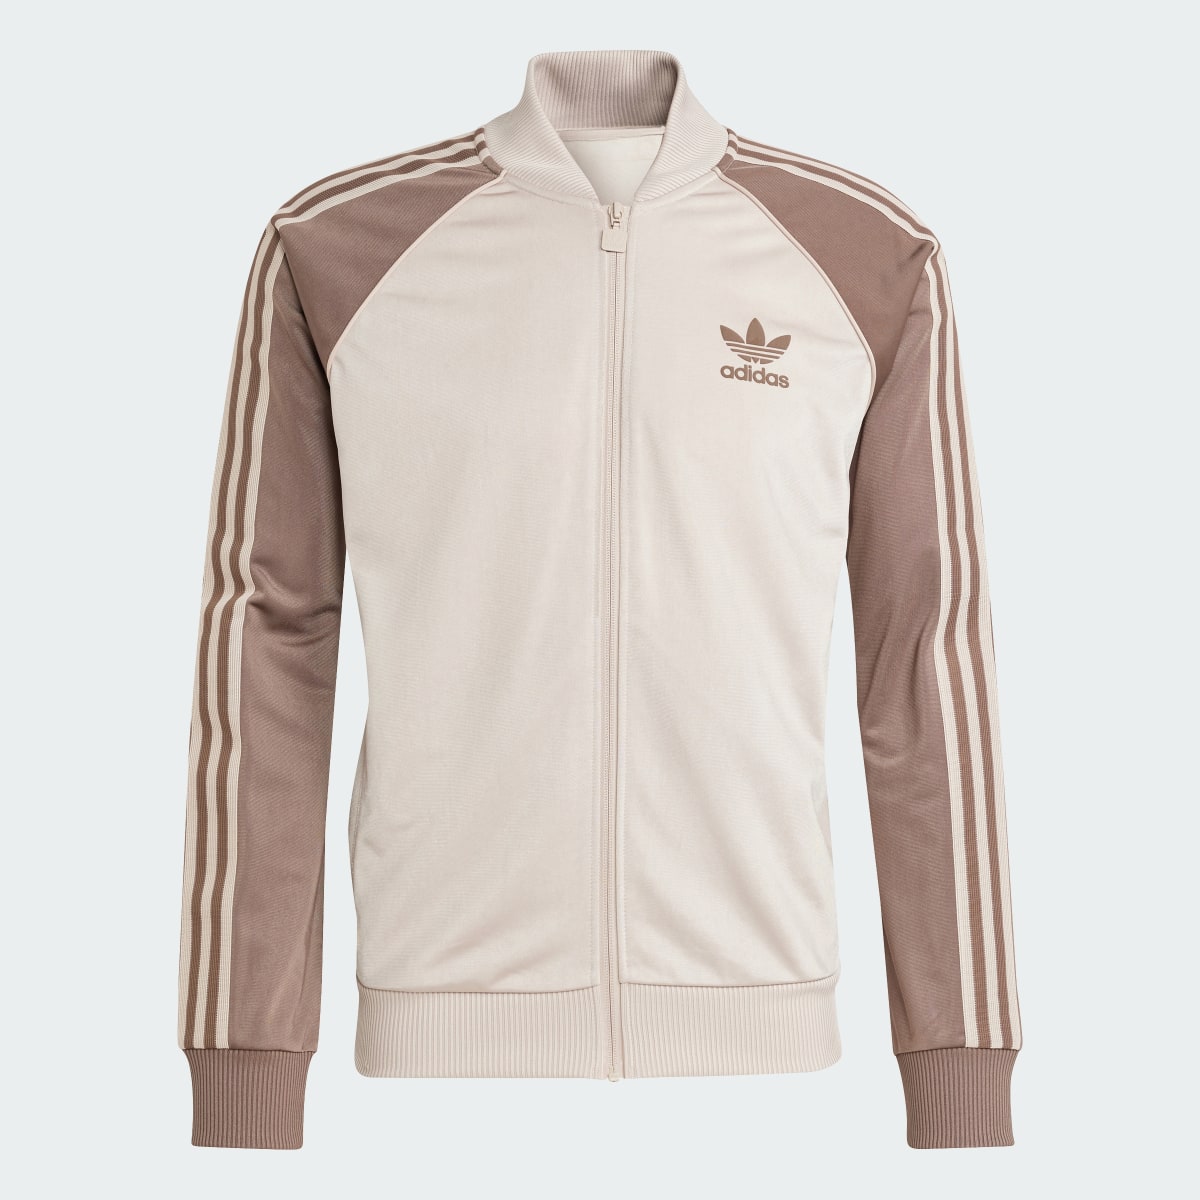 Adidas Track top SST. 5